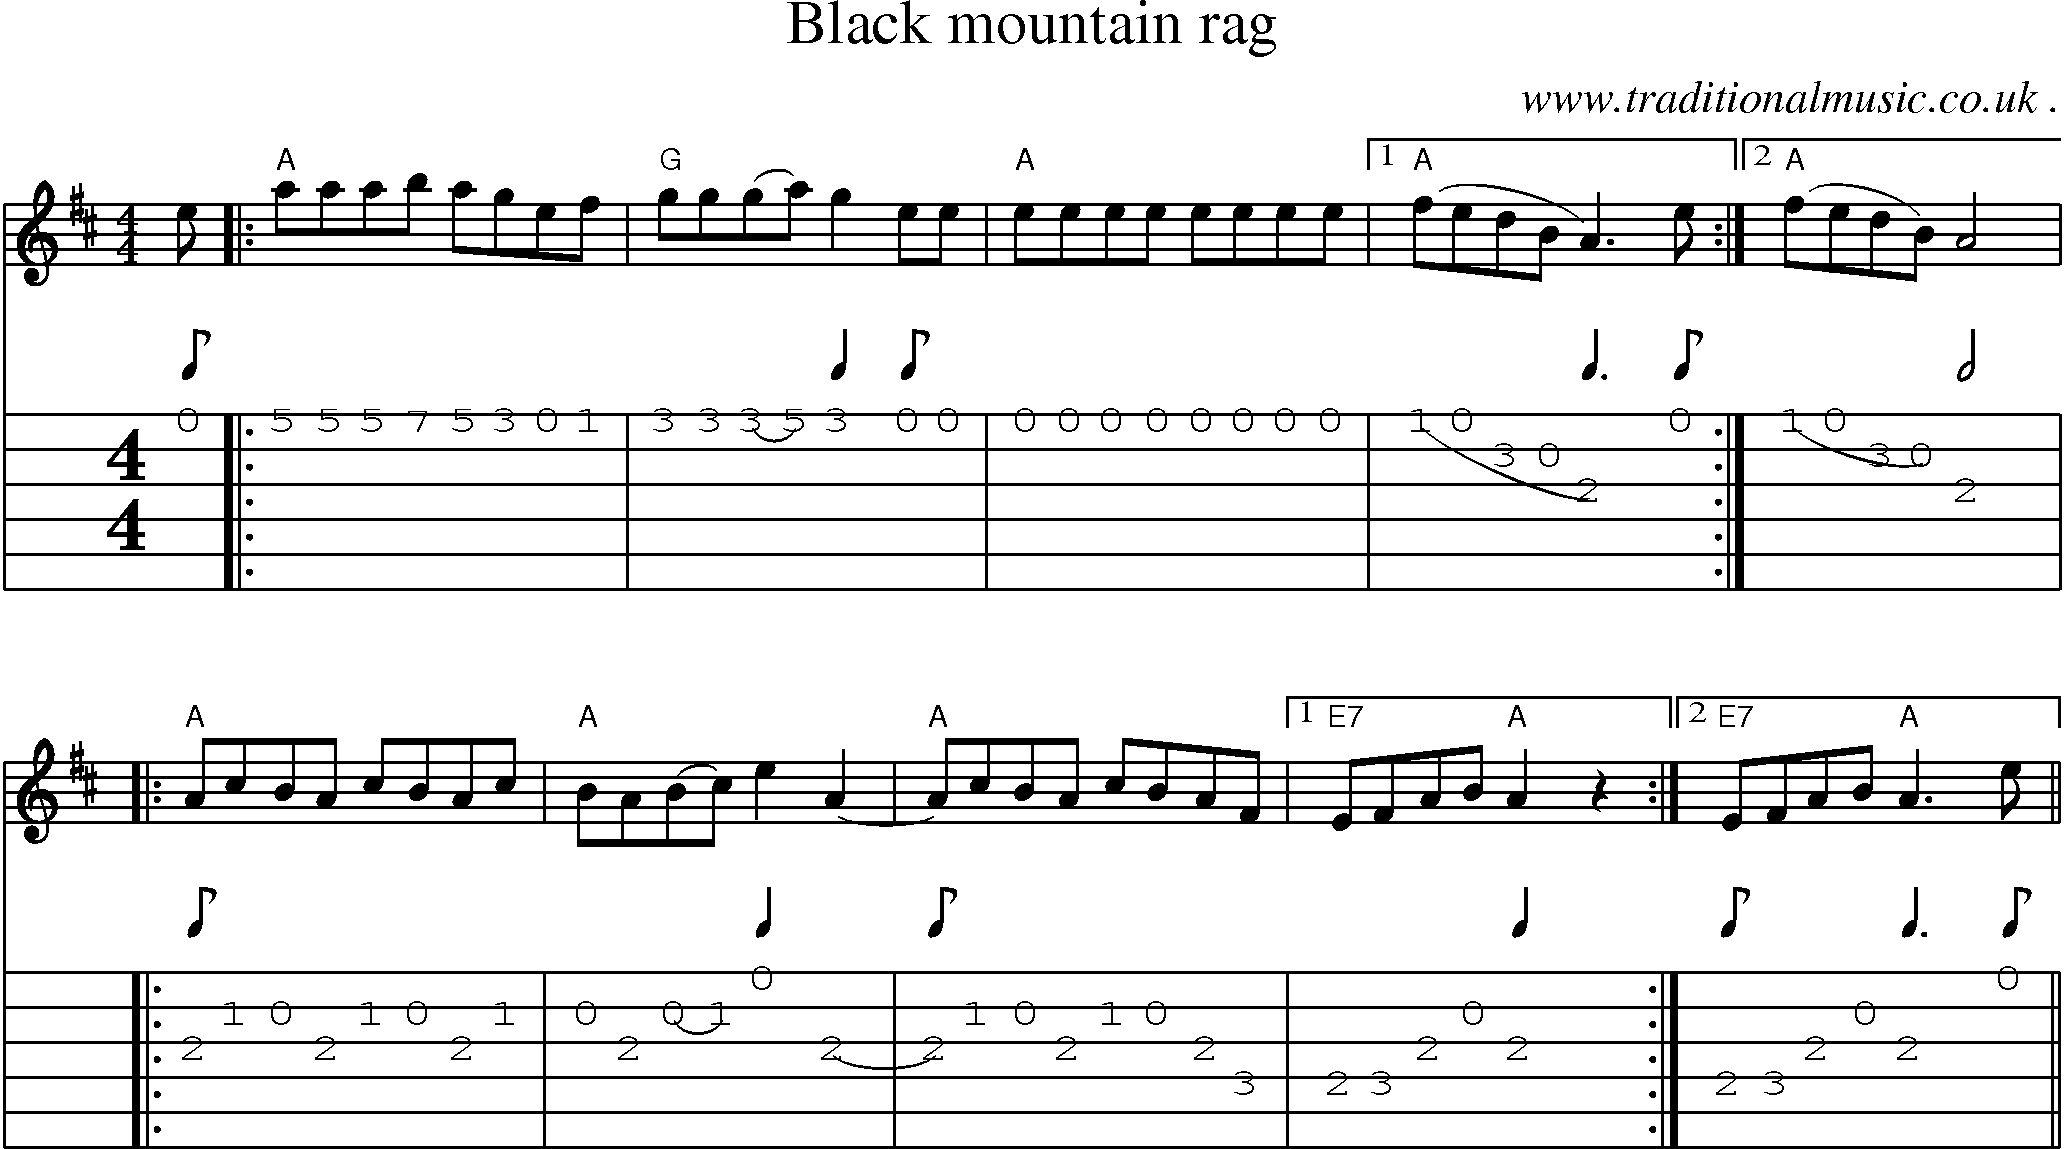 Music Score and Guitar Tabs for Black Mountain Rag